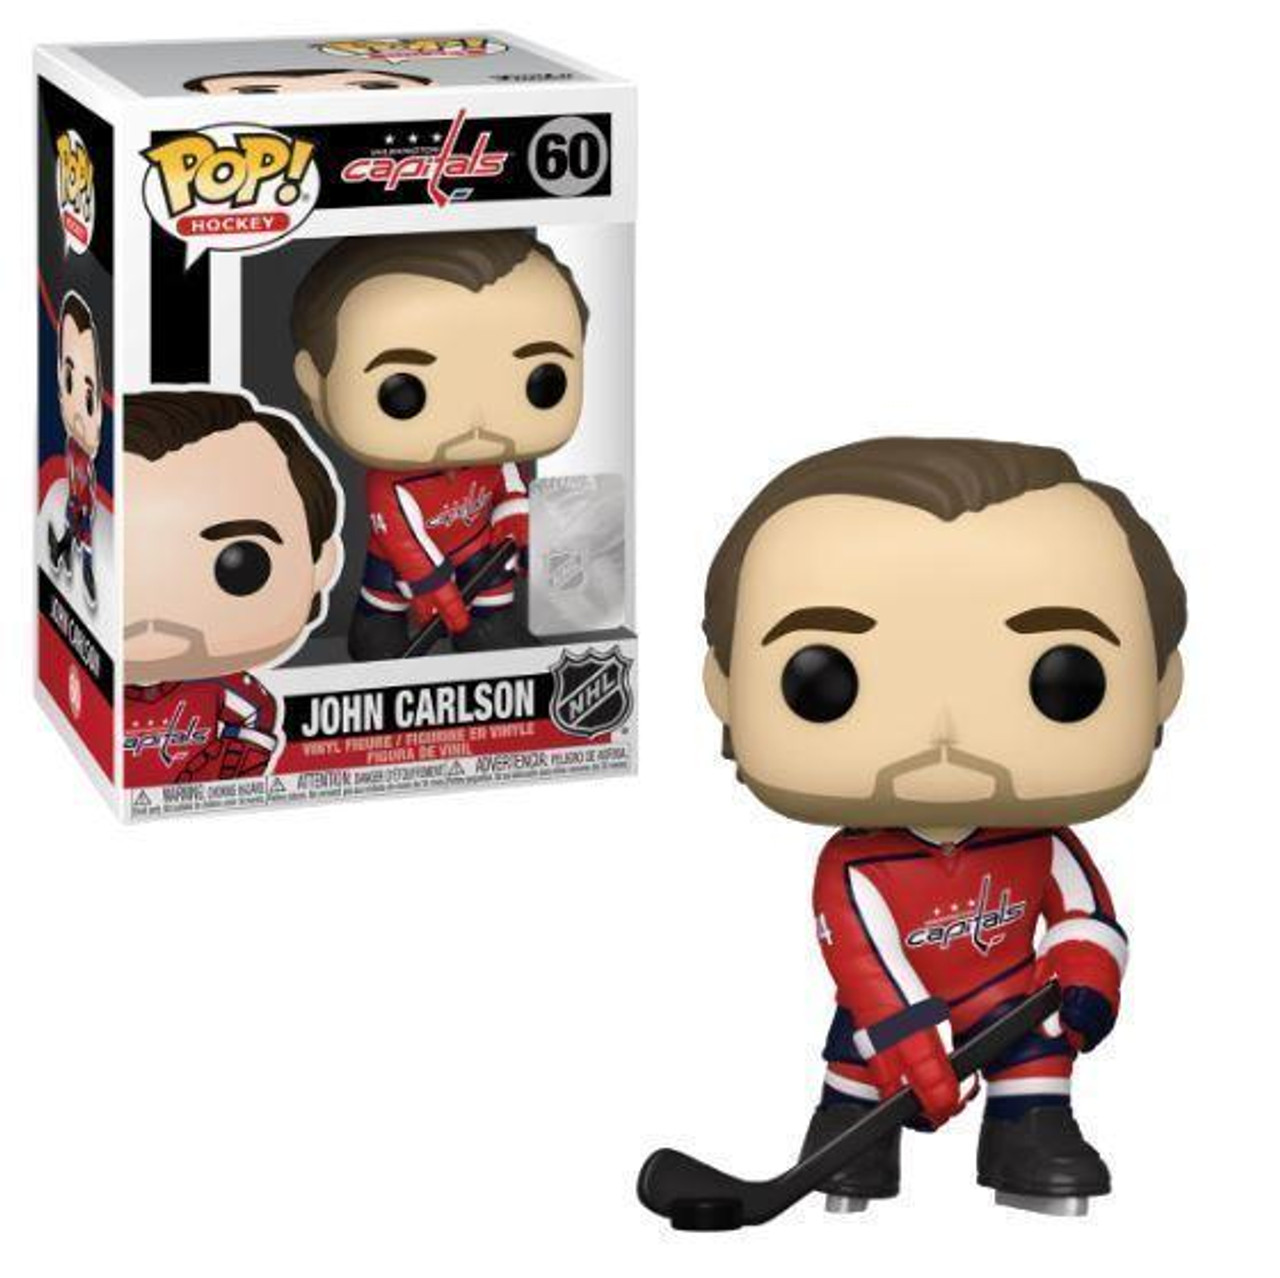 Funko POP! NHL players are finally on the way - Yahoo Sports